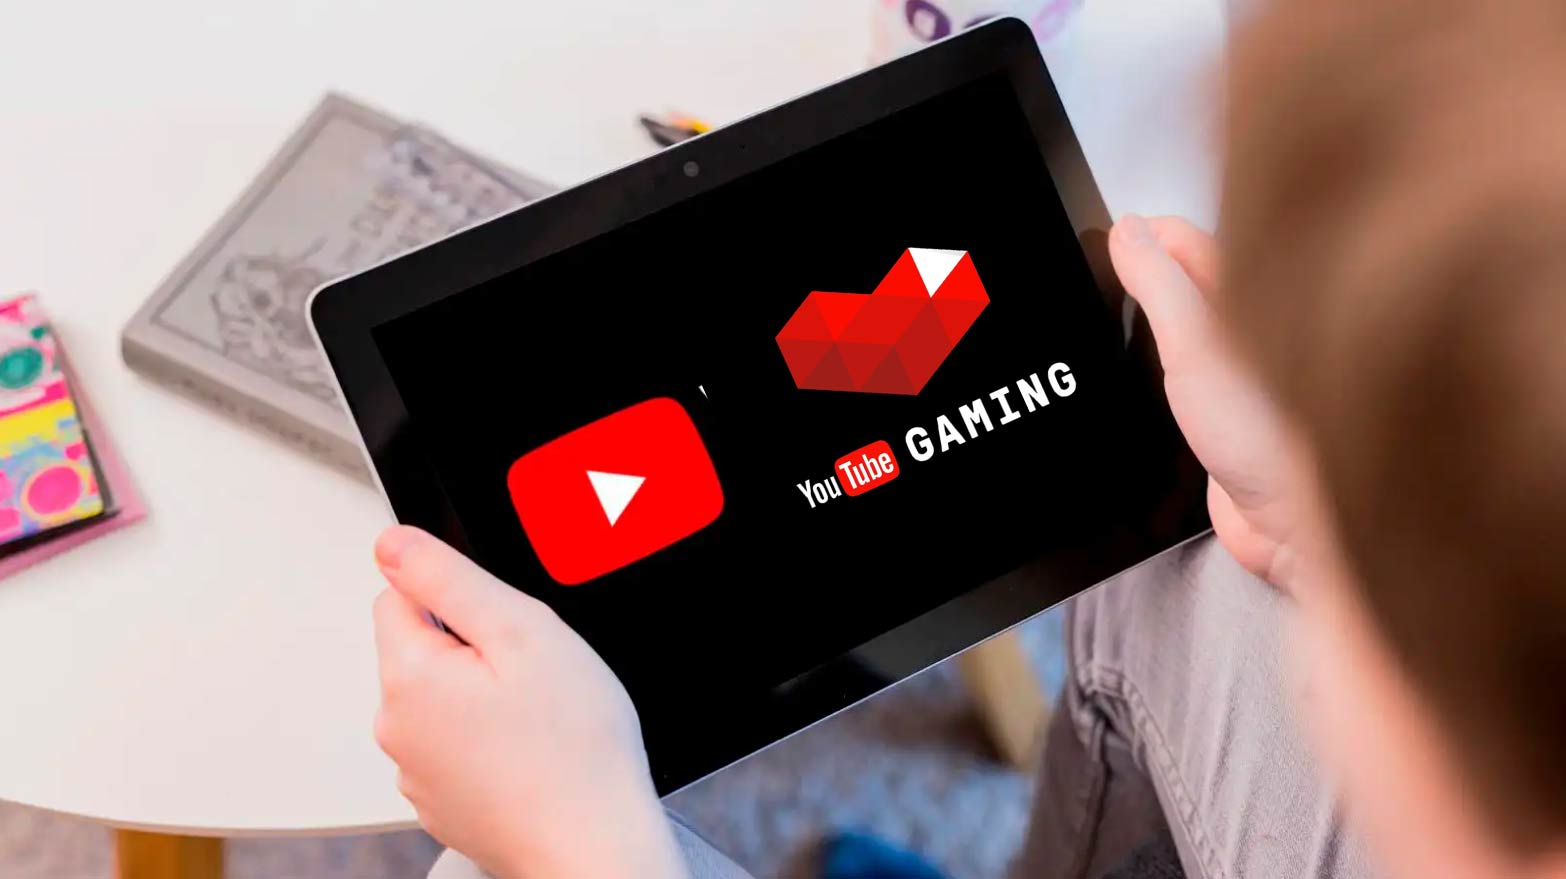 YouTube is internally testing a product for playing online games